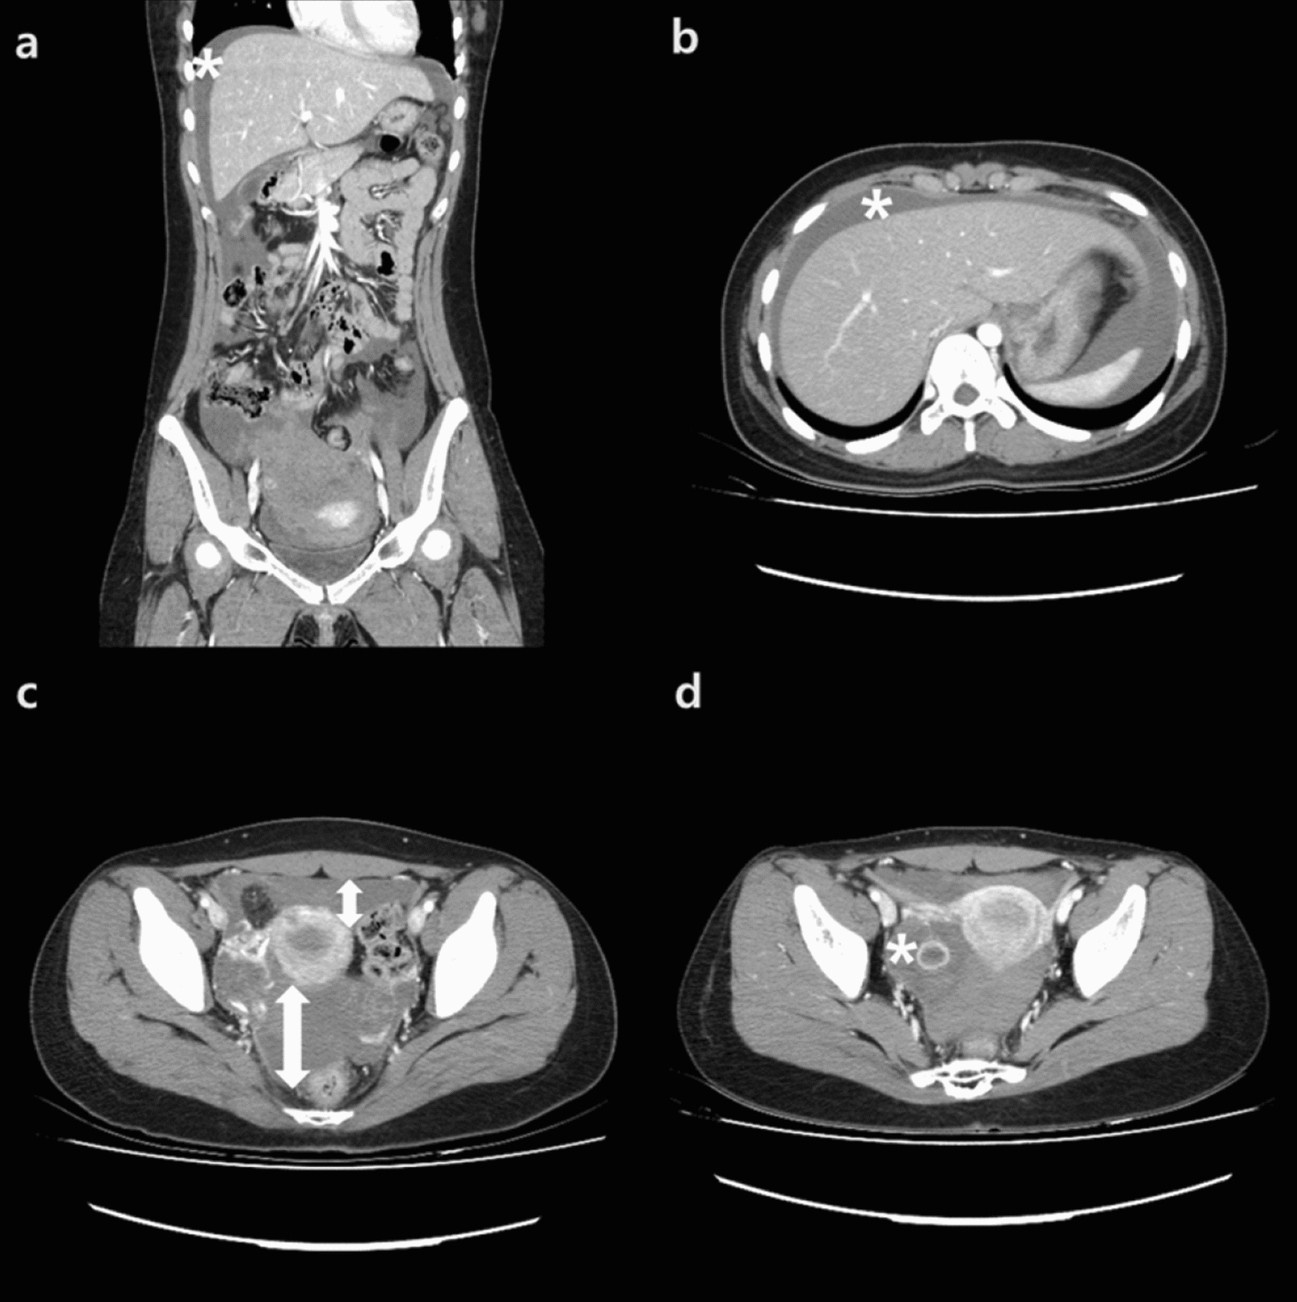 The predicting factors for indication of surgery in patients with  hemoperitoneum caused by corpus luteum cyst rupture